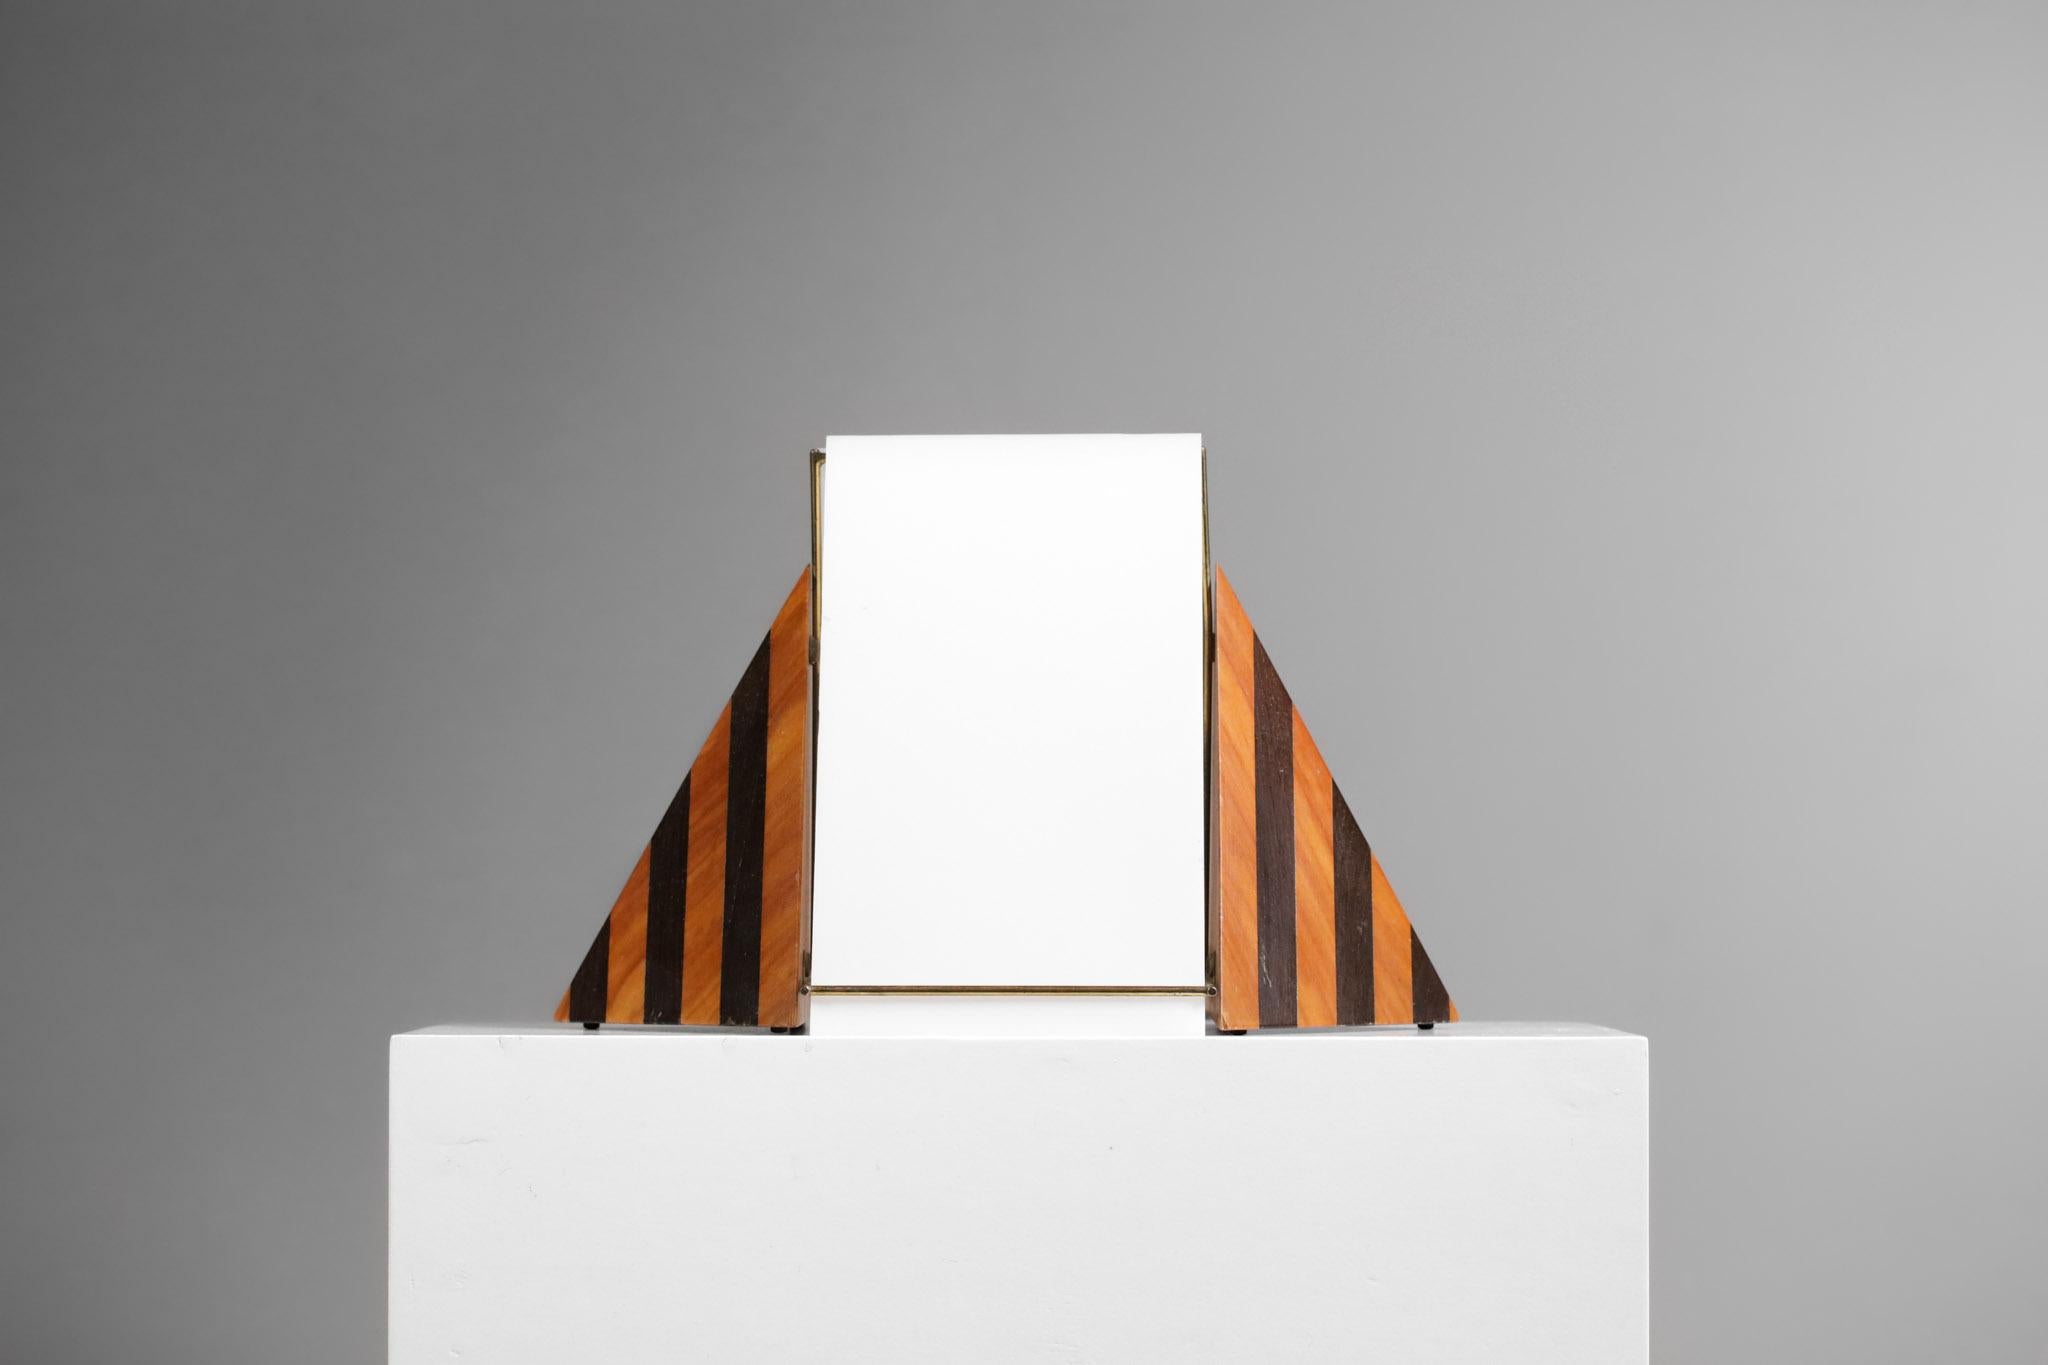 Italian desk or table lamp from the 80's in the taste of the work of Tobia & Arfa Scarpa. Structure of the lamp in veneered wood, solid brass rods and shade formed with two white plexiglass plates. Very original pyramid shape with clean design.